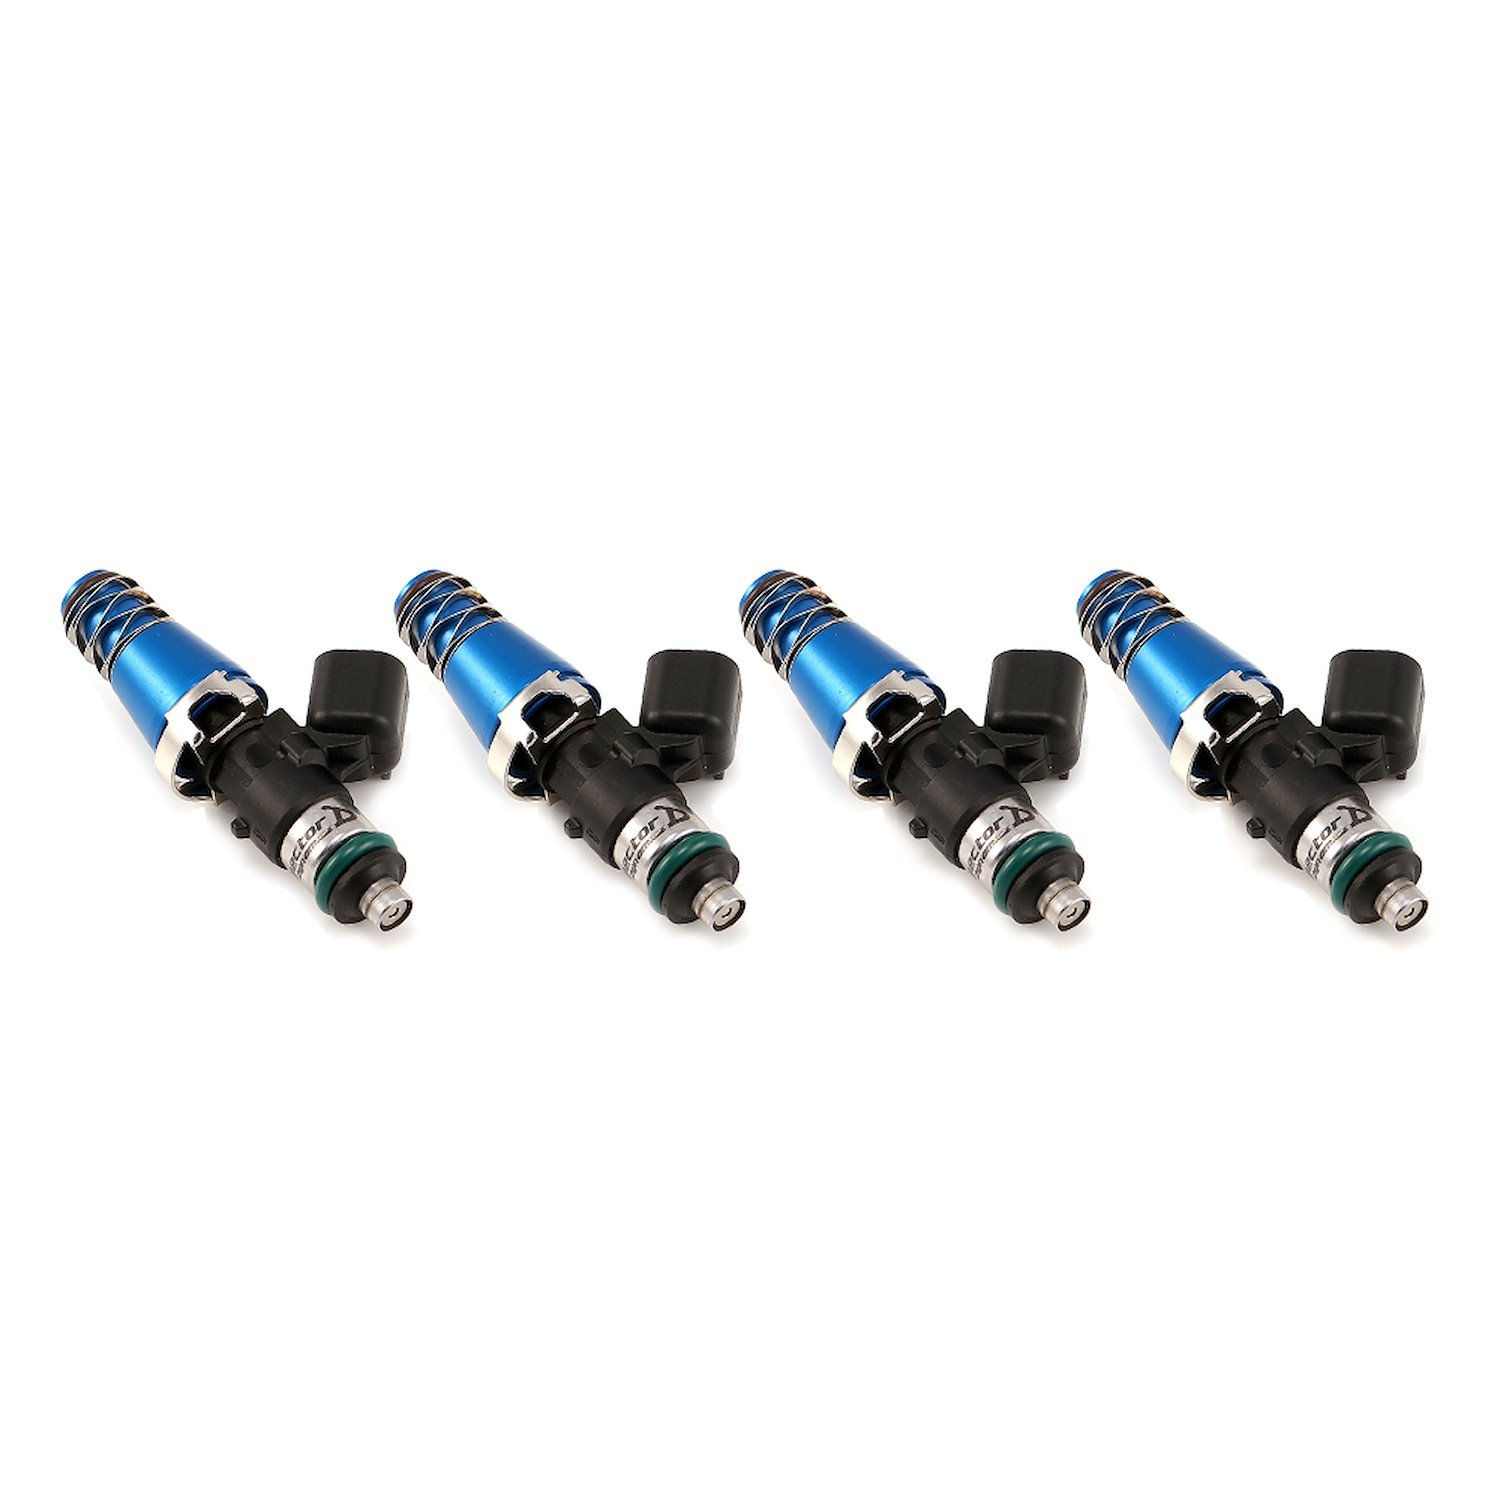 1700.60.11.14.4 1700cc Fuel Injector Set, 60 mm Length, 11 mm Blue Top, 14 mm Lower O-Ring